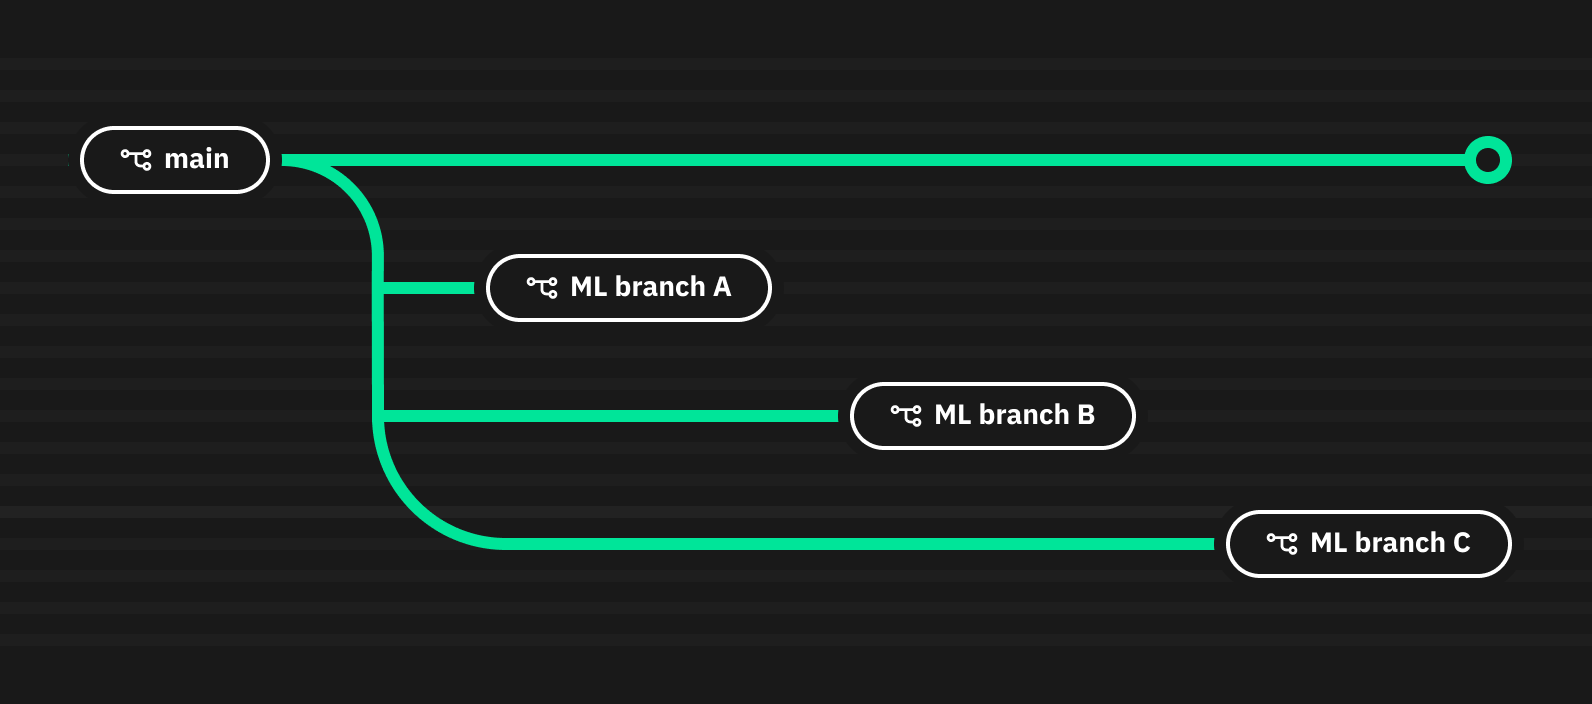 ML branches